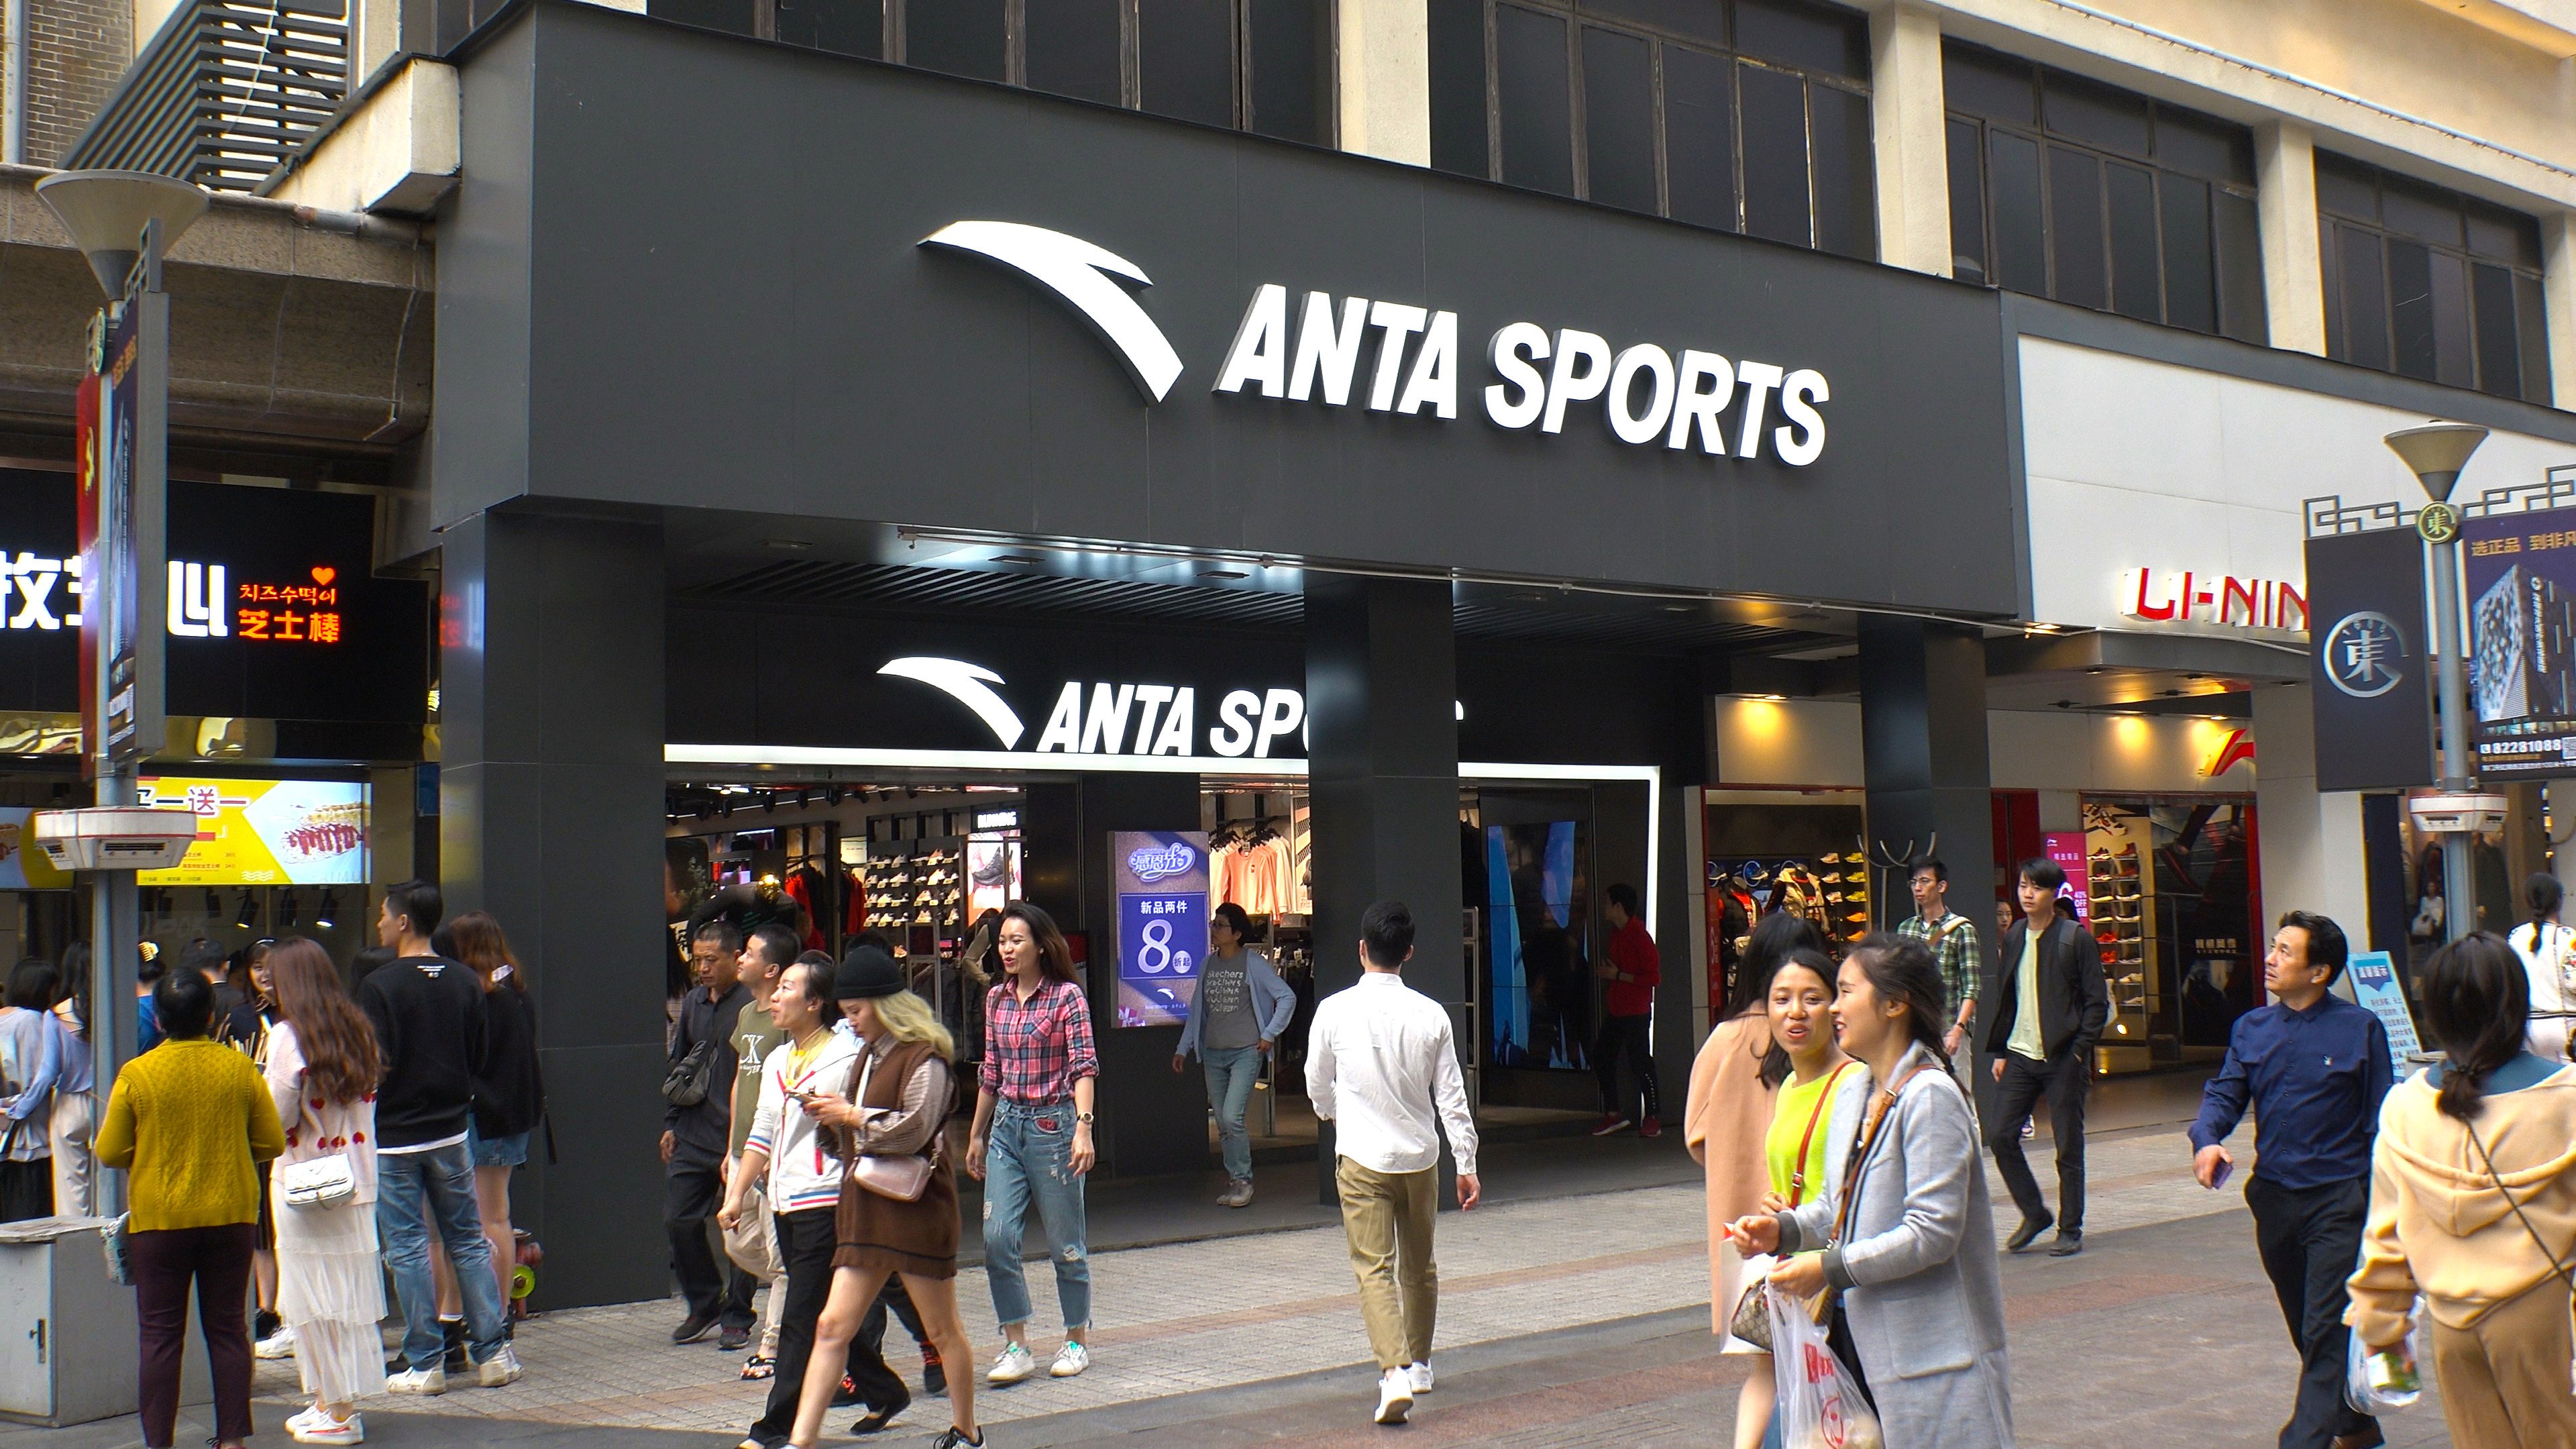 Shares of Chinese apparel and sports brands have gained in the Uygur row between Beijing and the West. Photo: Shutterstock